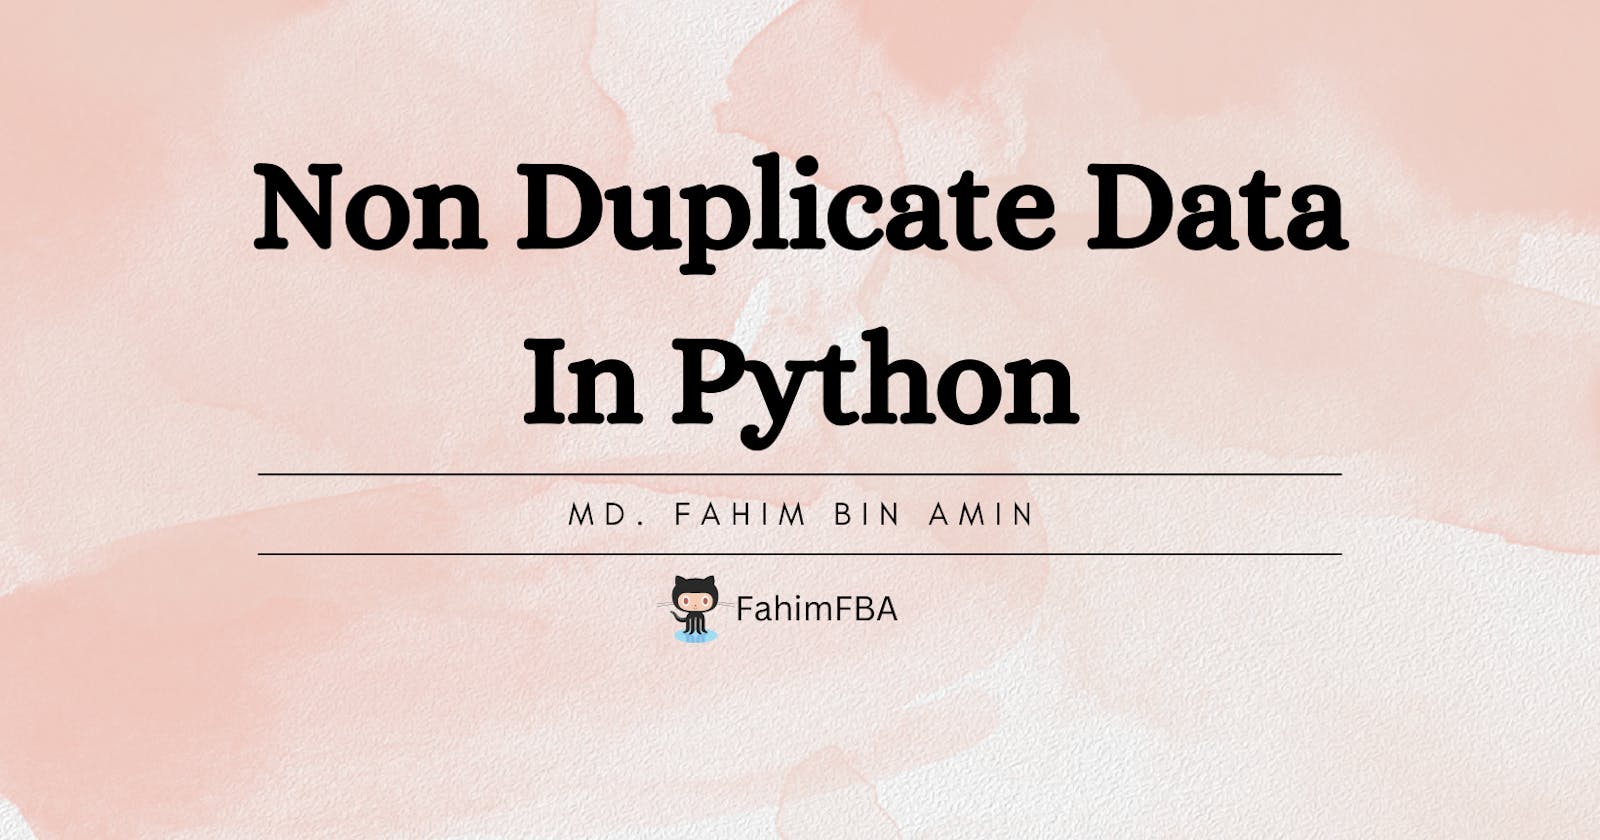 The Best Data Structure For Storing Non-Duplicate Items In Python